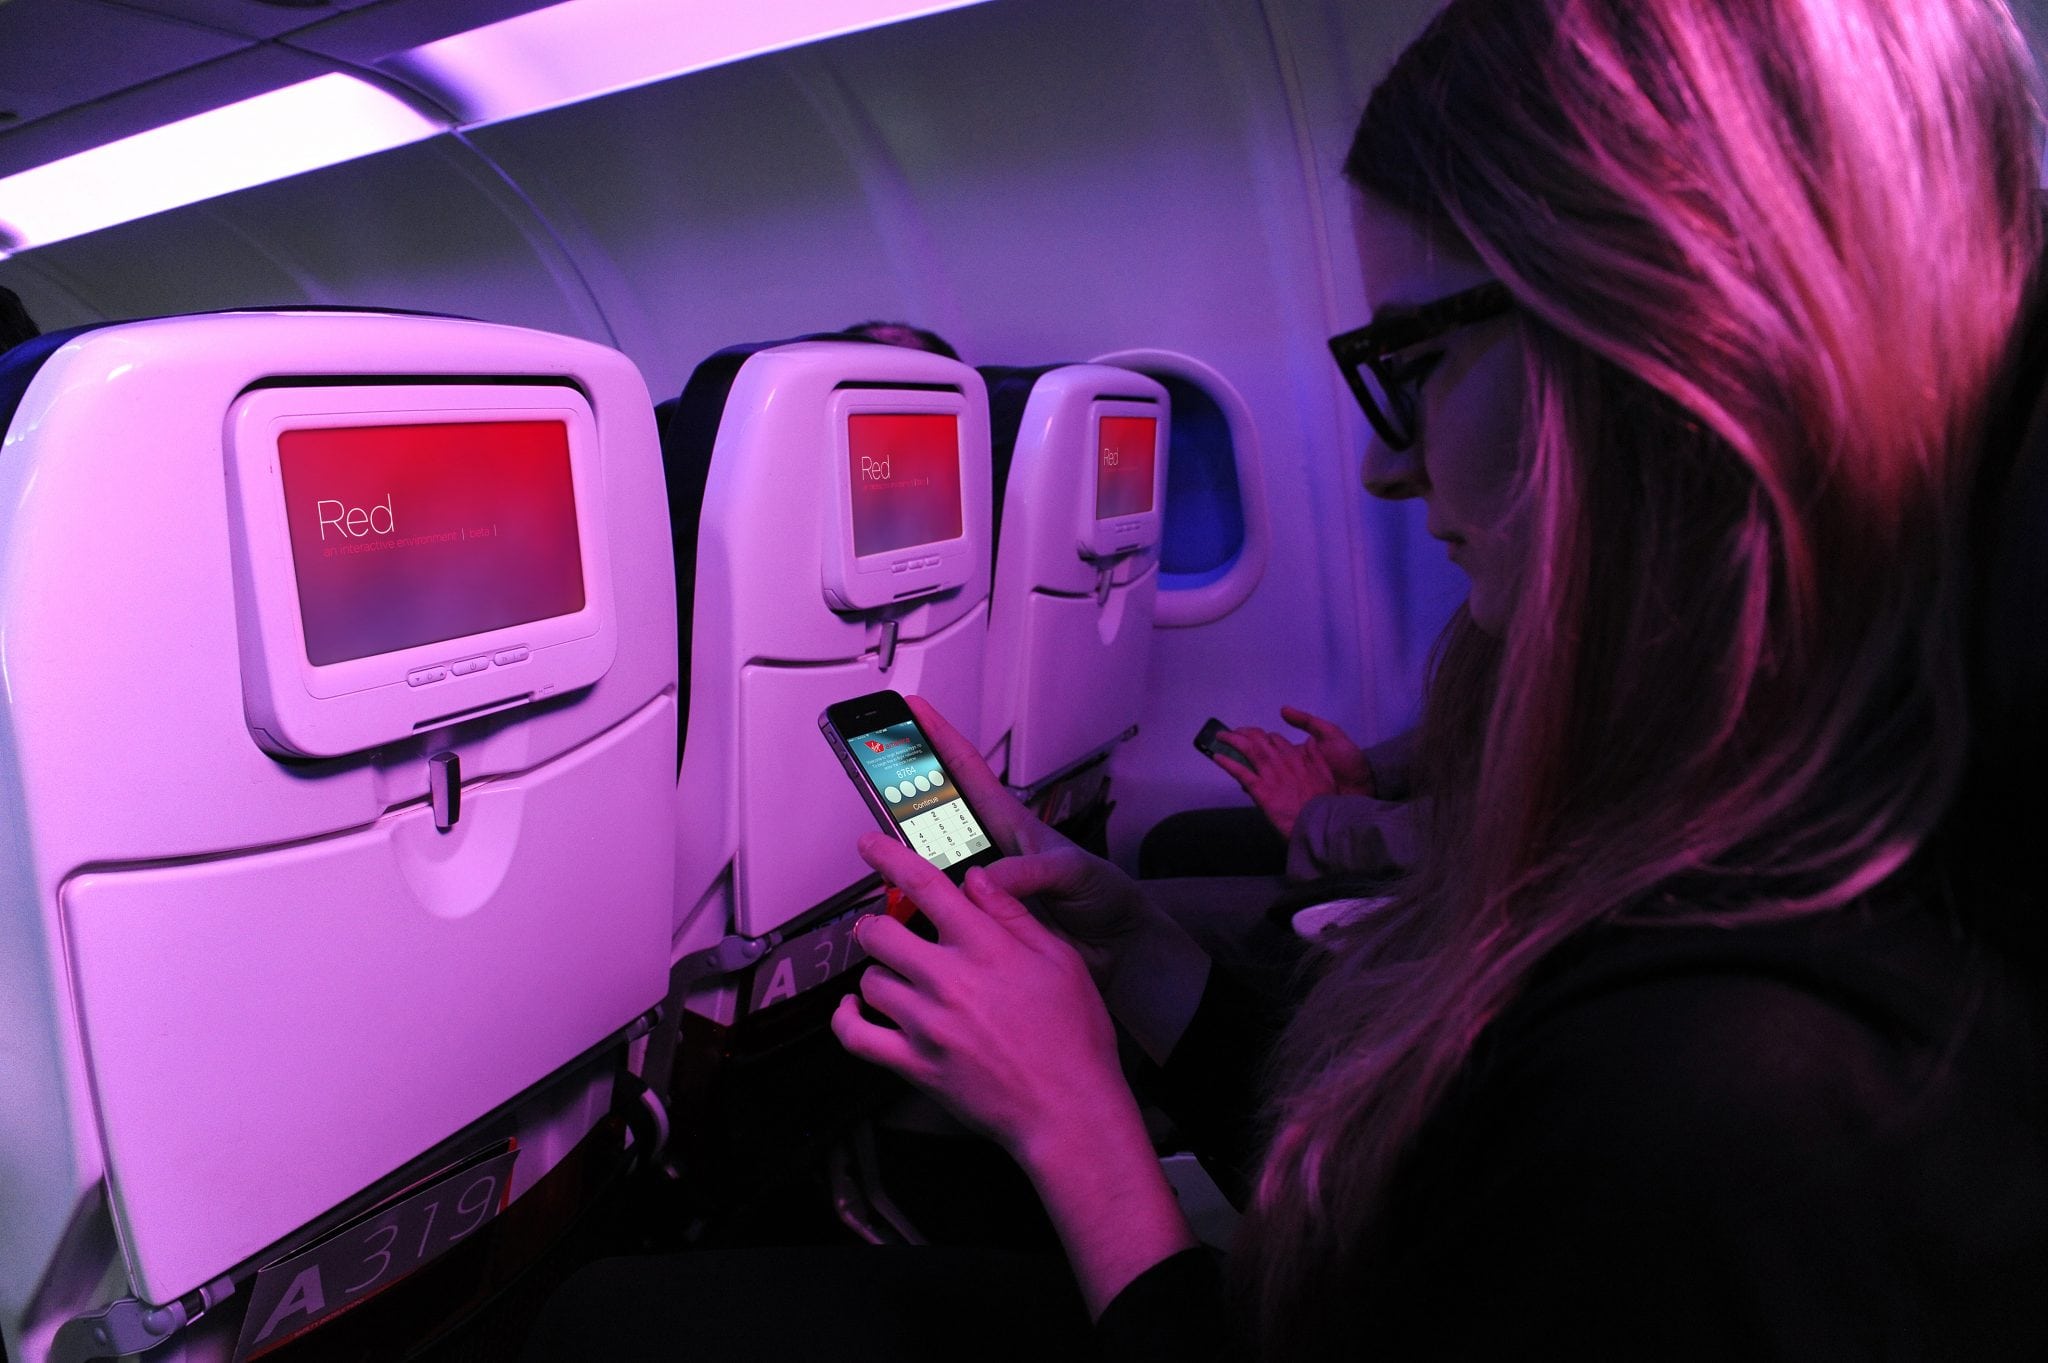 Virgin America will introduce Viasat's new Exede Ku- and Ka-band high-speed Wi-Fi onboard its new A320s